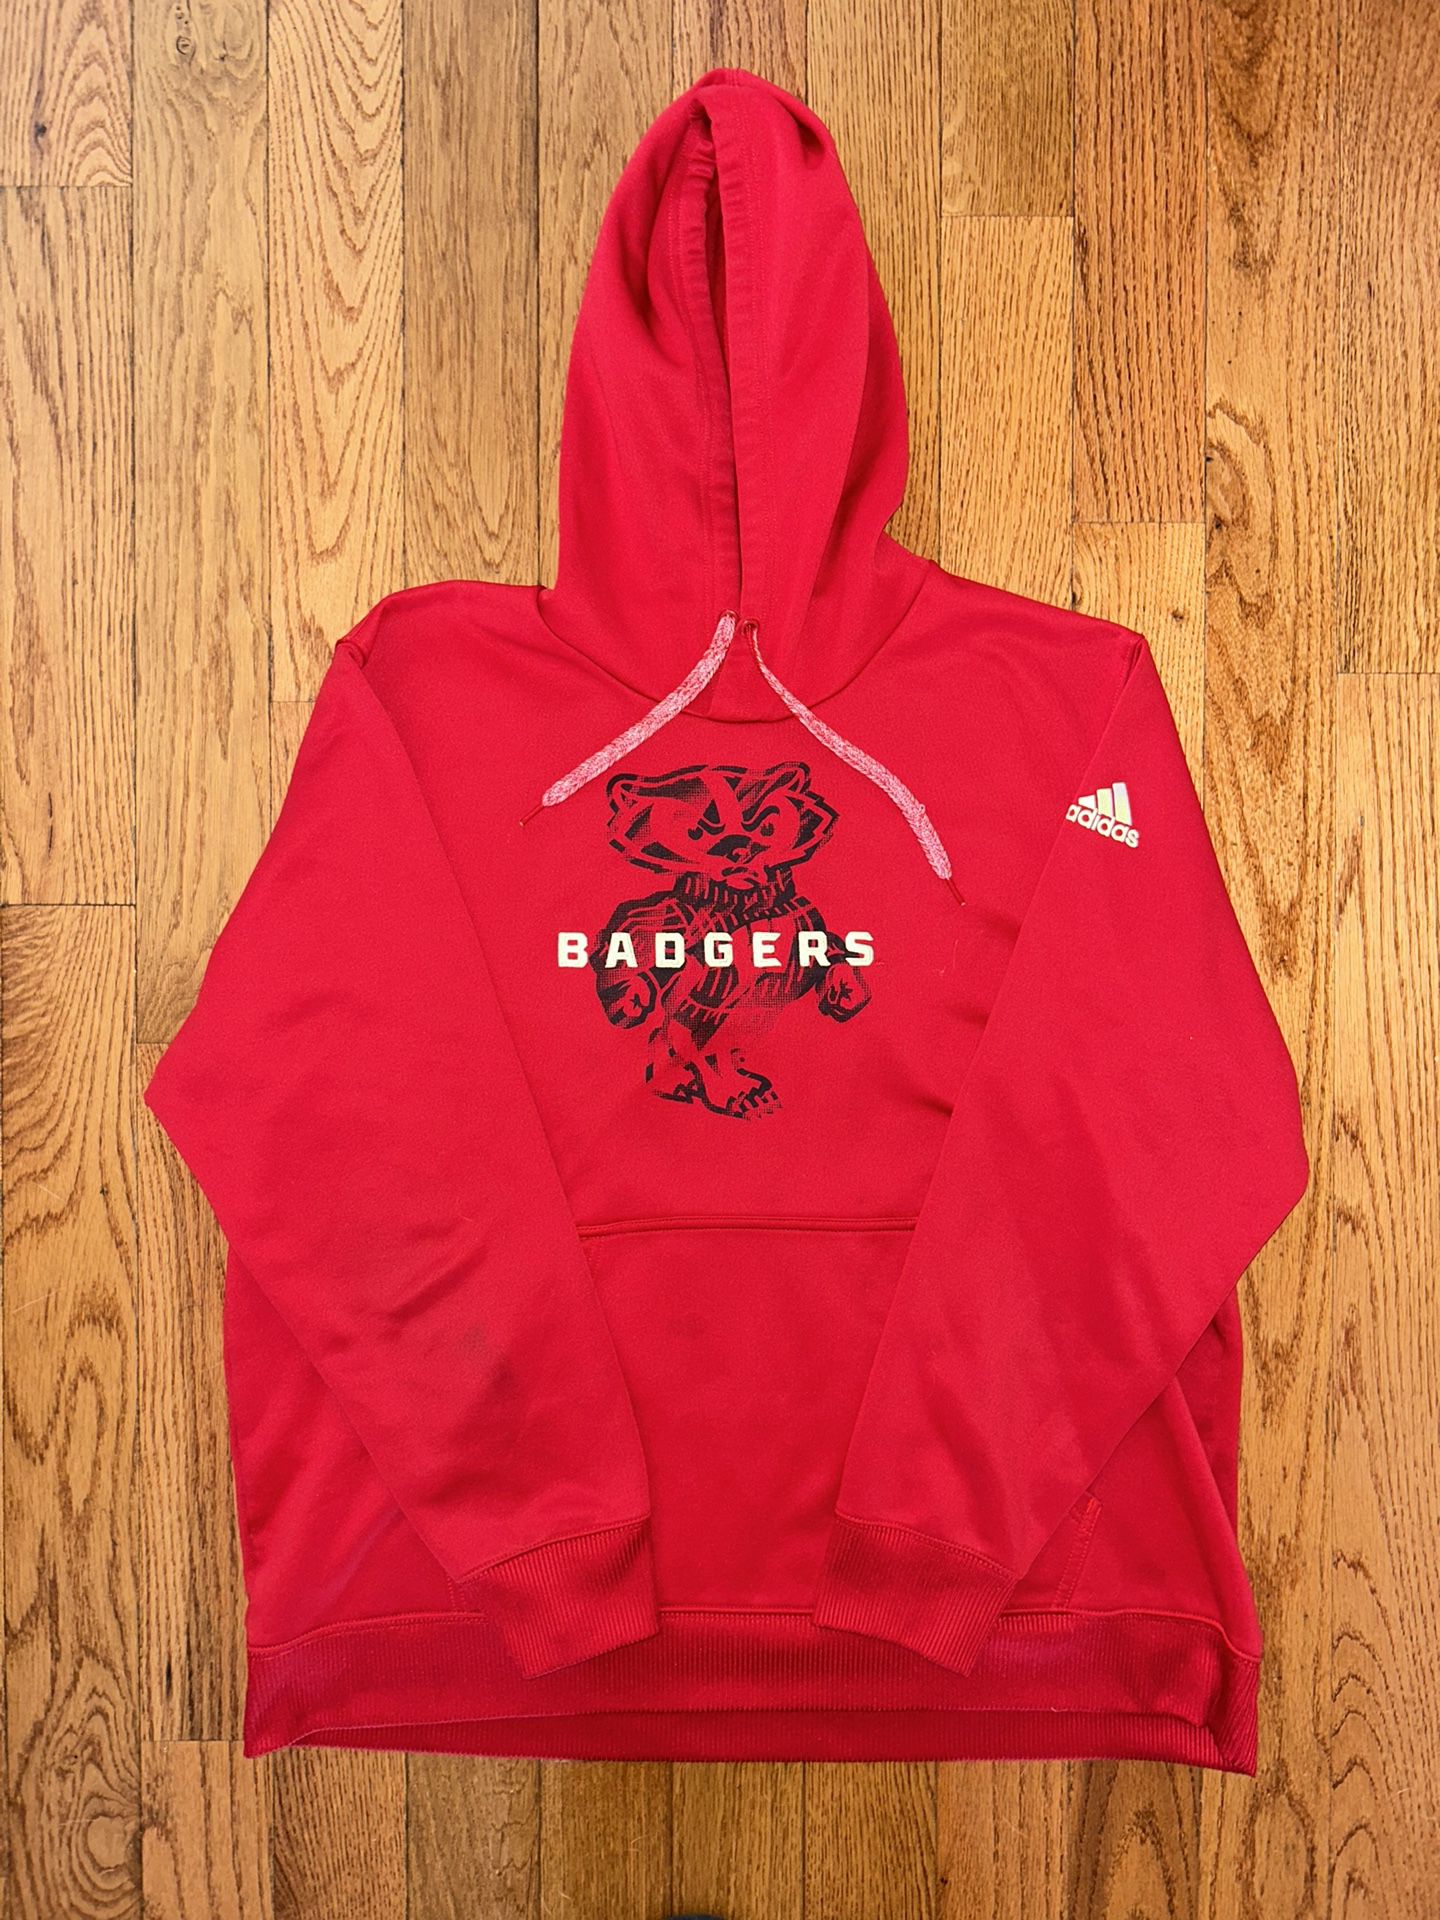 Wisconsin Badgers Adidas Sewn Hoodie Size 2XL